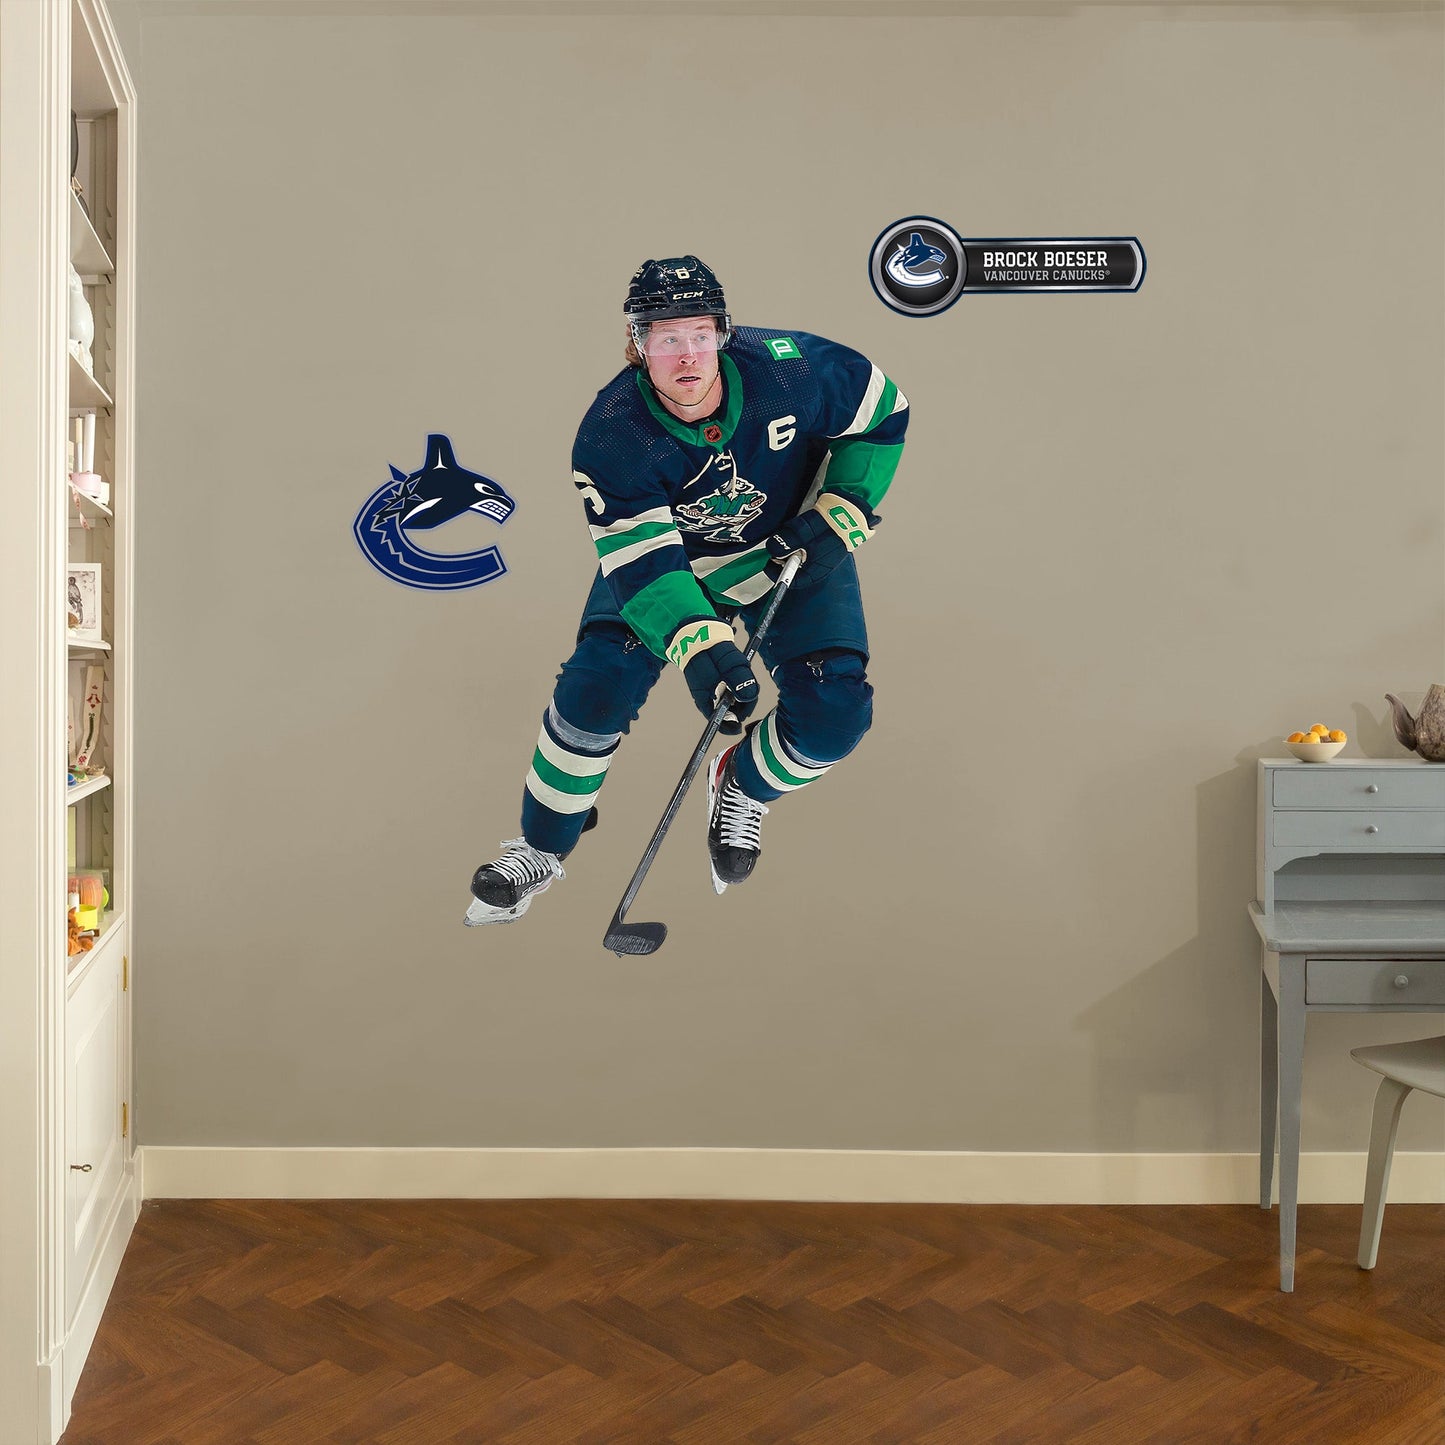 Vancouver Canucks: Brock Boeser - Officially Licensed NHL Removable Adhesive Decal